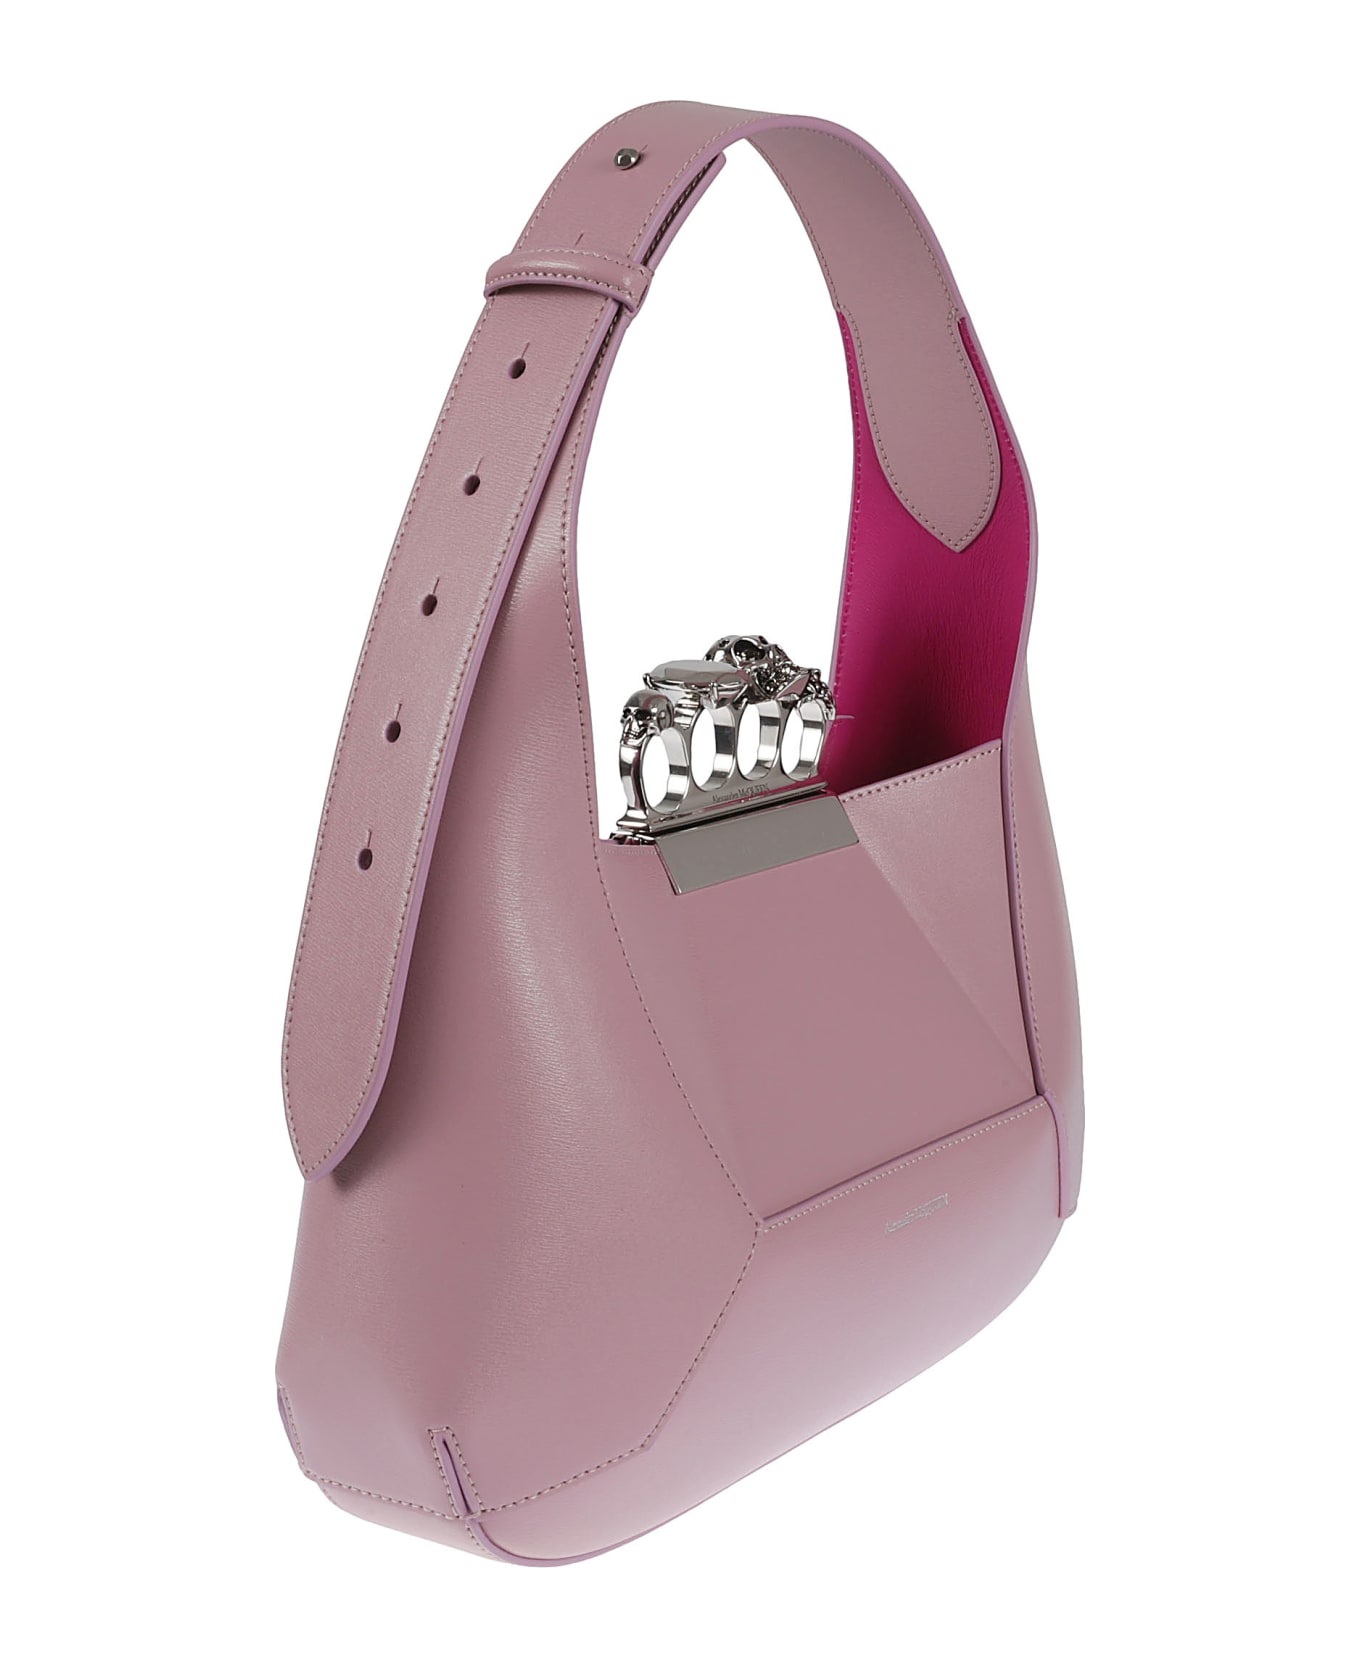 Alexander McQueen The Jeweled Tote - Antique Pink